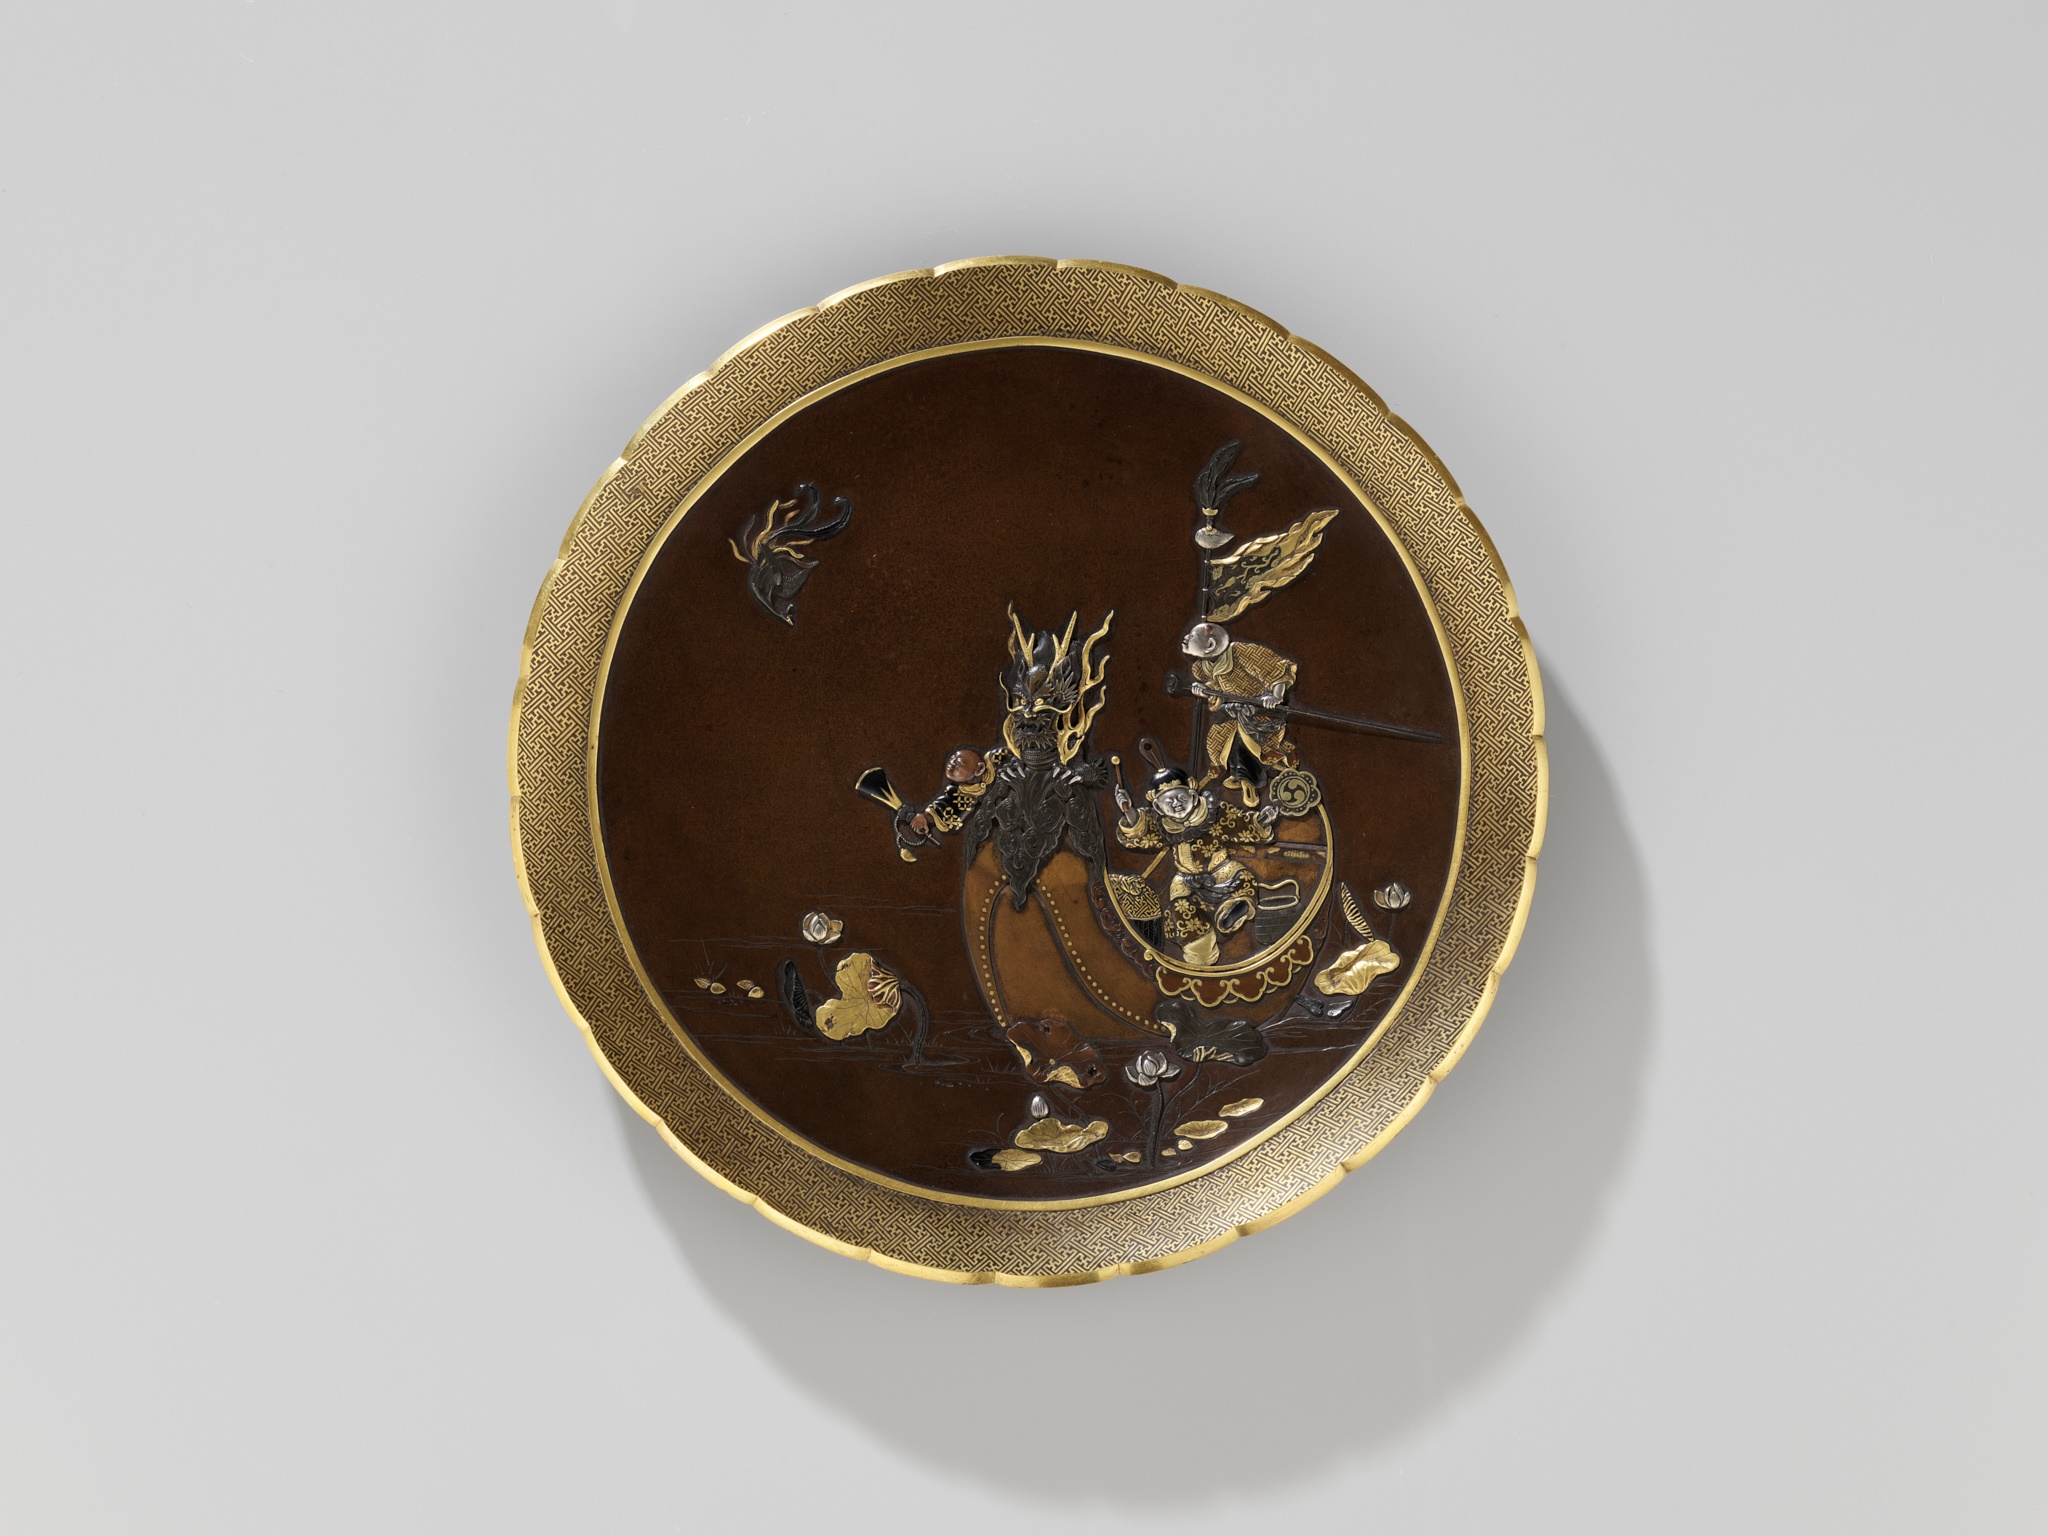 INOUE: A SUPERB INLAID BRONZE DISH DEPICTING BOYS ON A DRAGON BOAT - Image 3 of 6